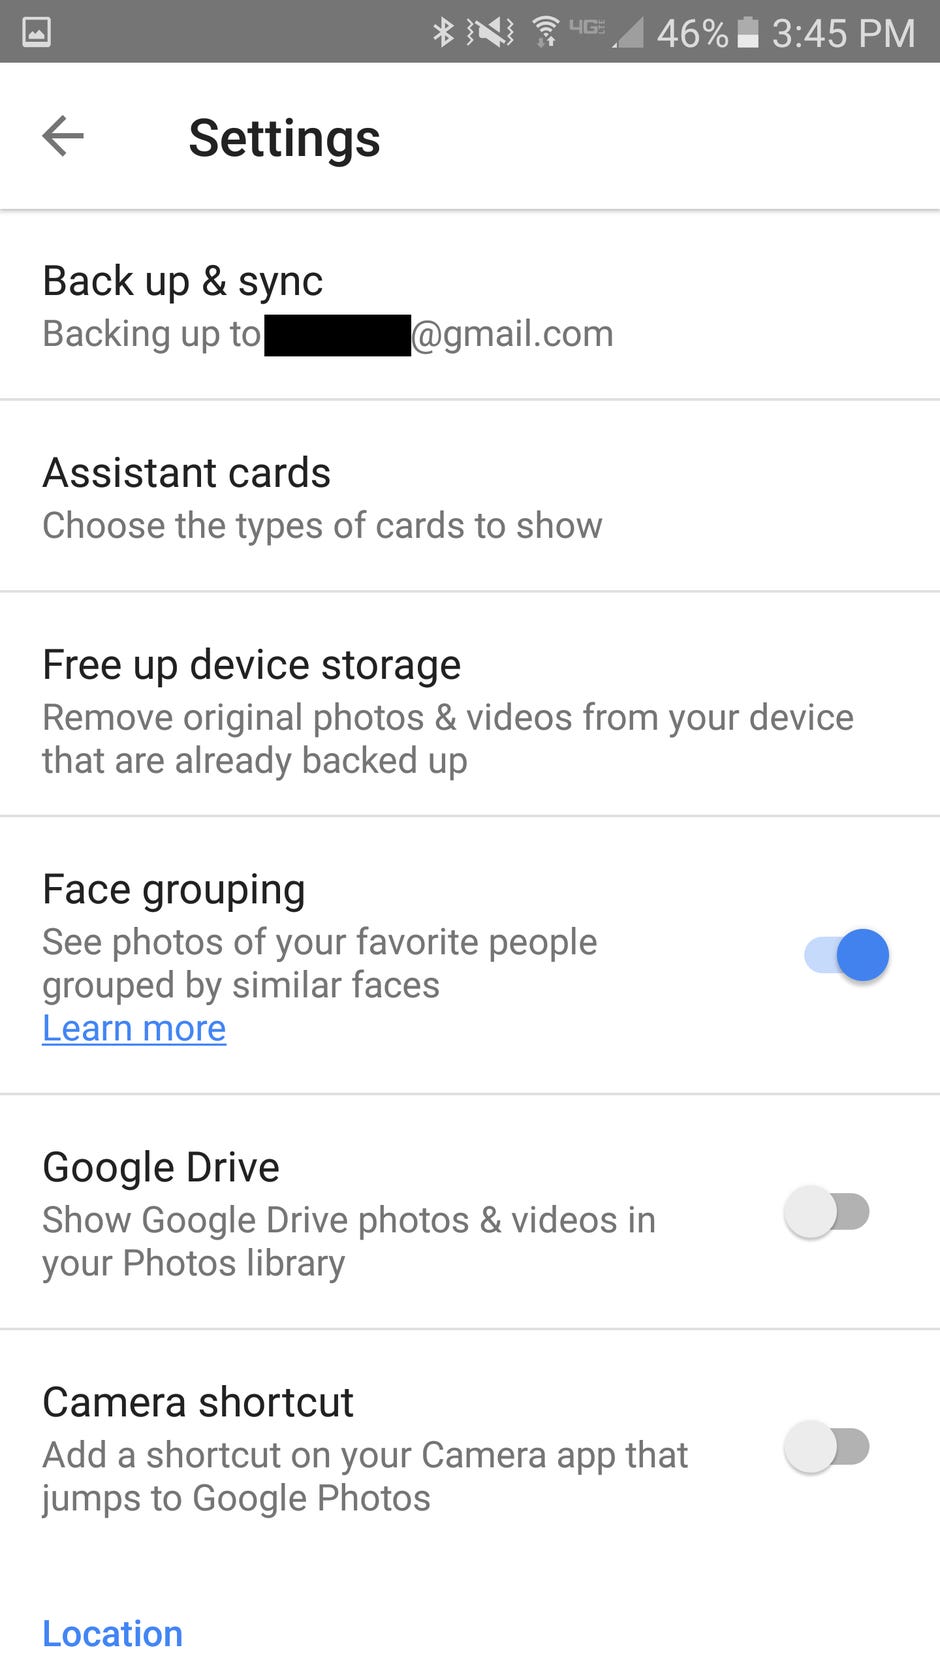 5 tricks to free up space on your Android phone - CNET